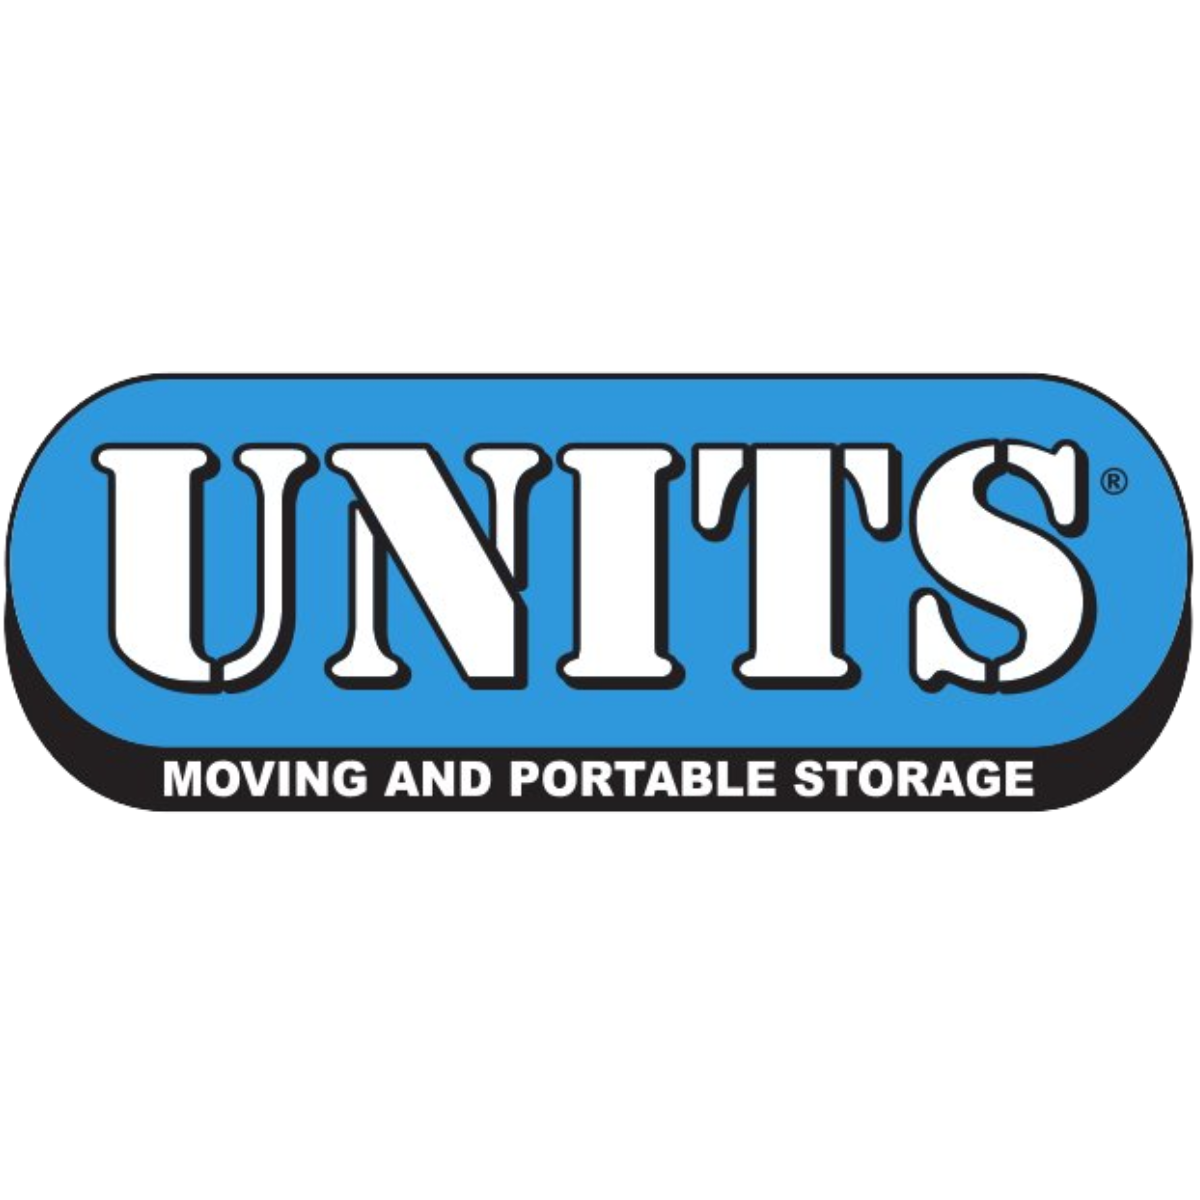 Tips for Extra Storage Space in Tight Spaces - UNITS Moving and